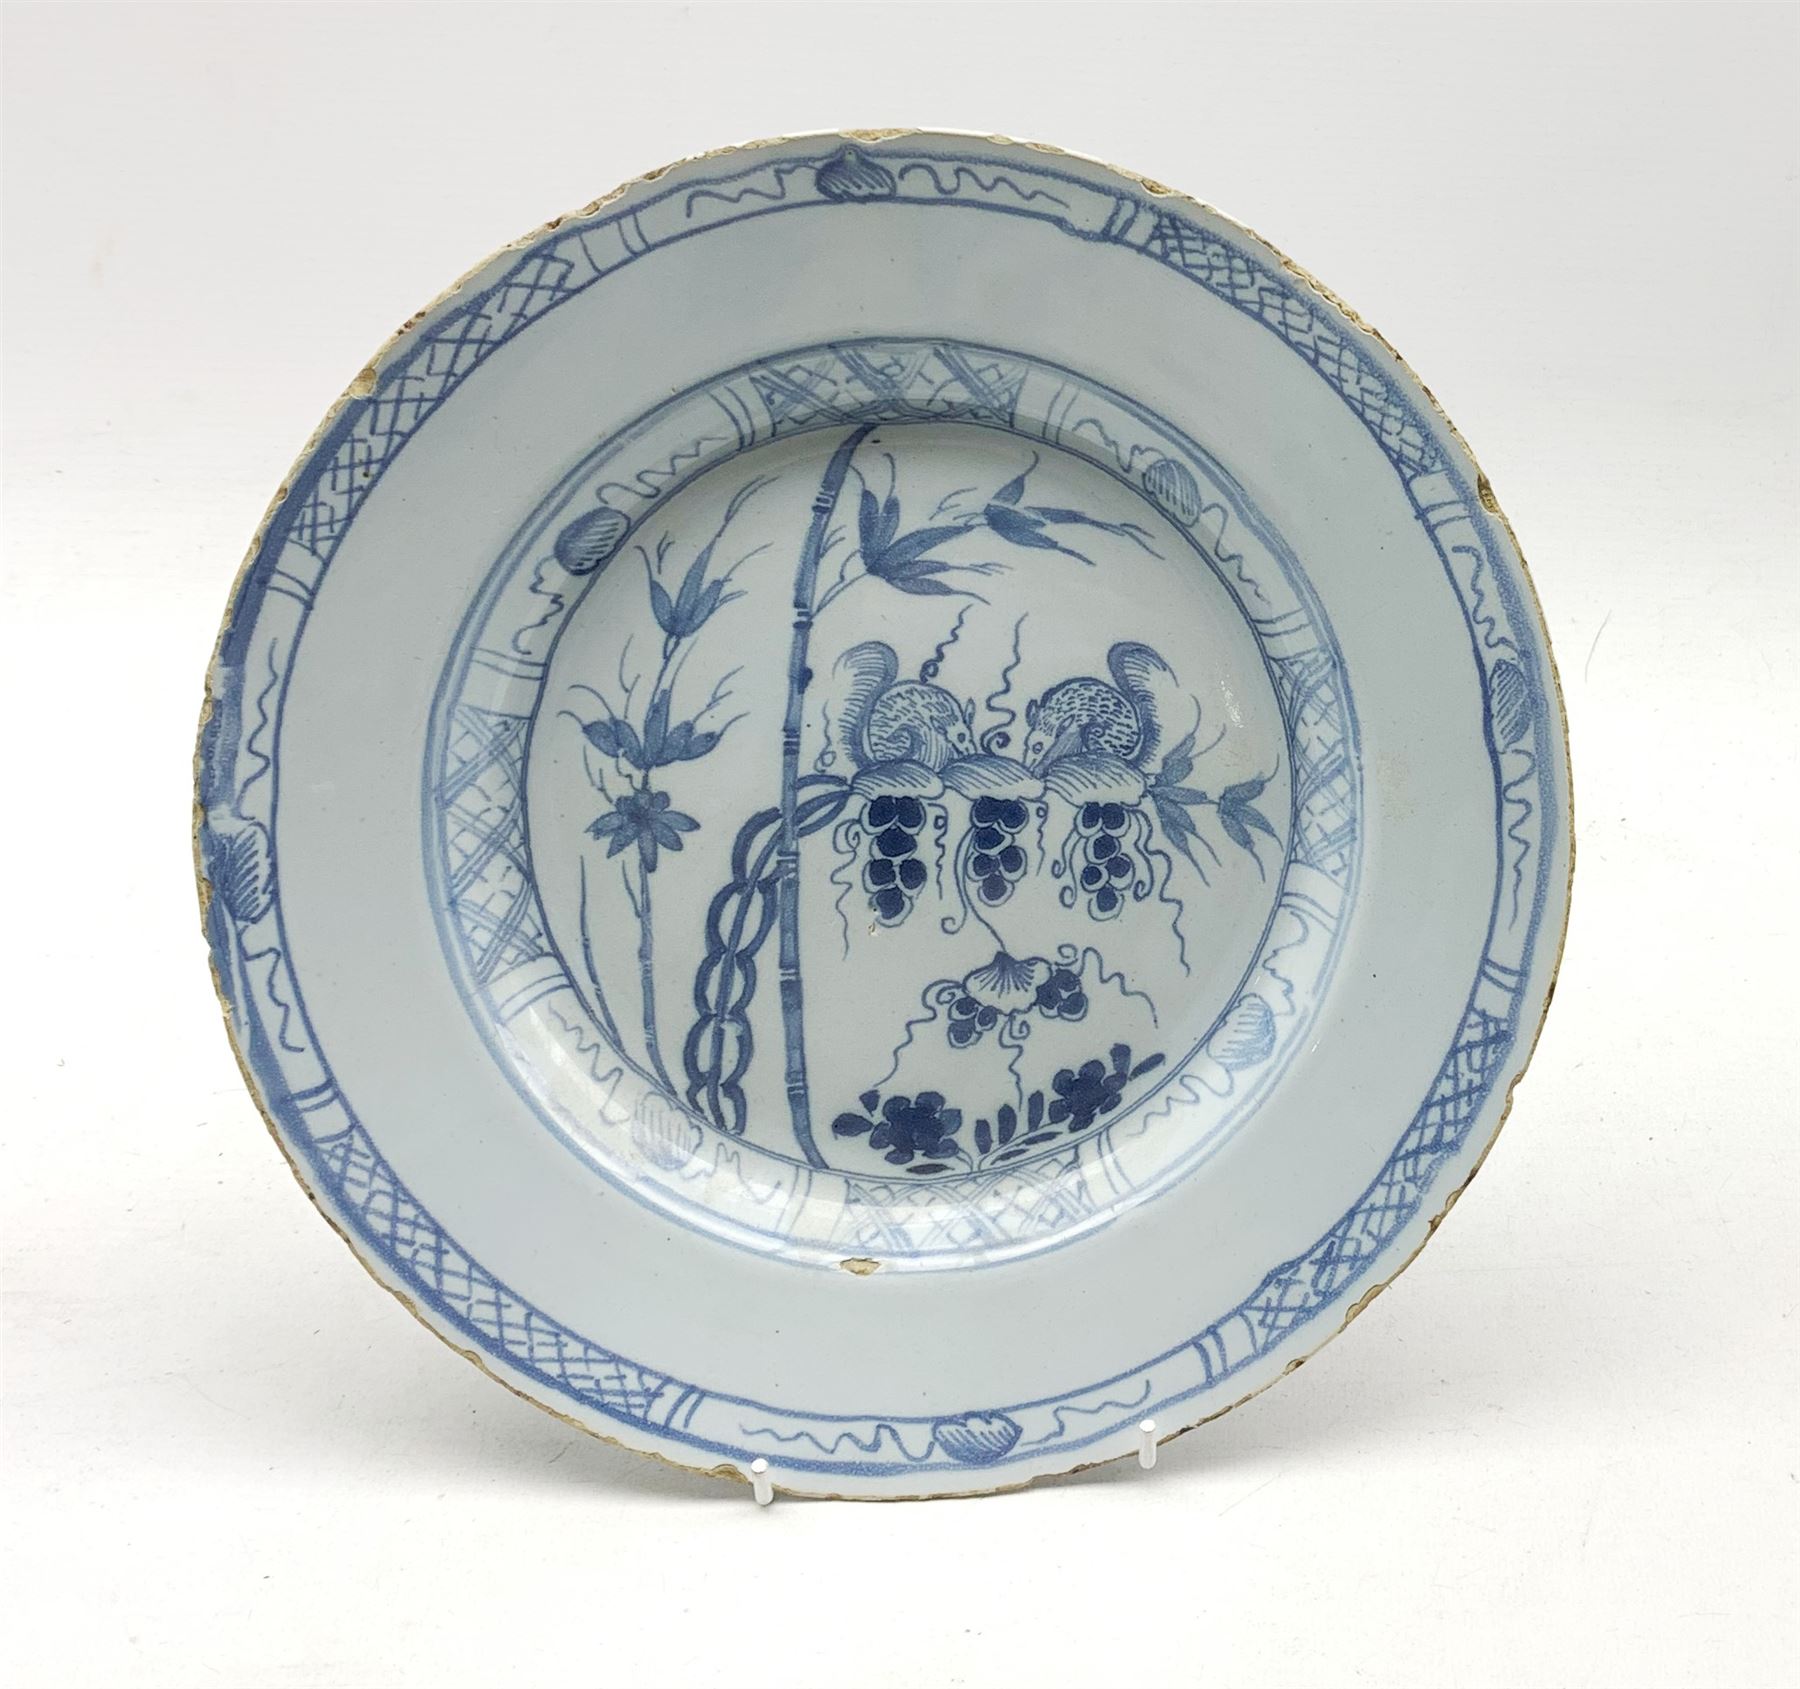 18th century Delft tin-glazed plate decorated with Squirrels feeding on fruiting vine amidst bamboo